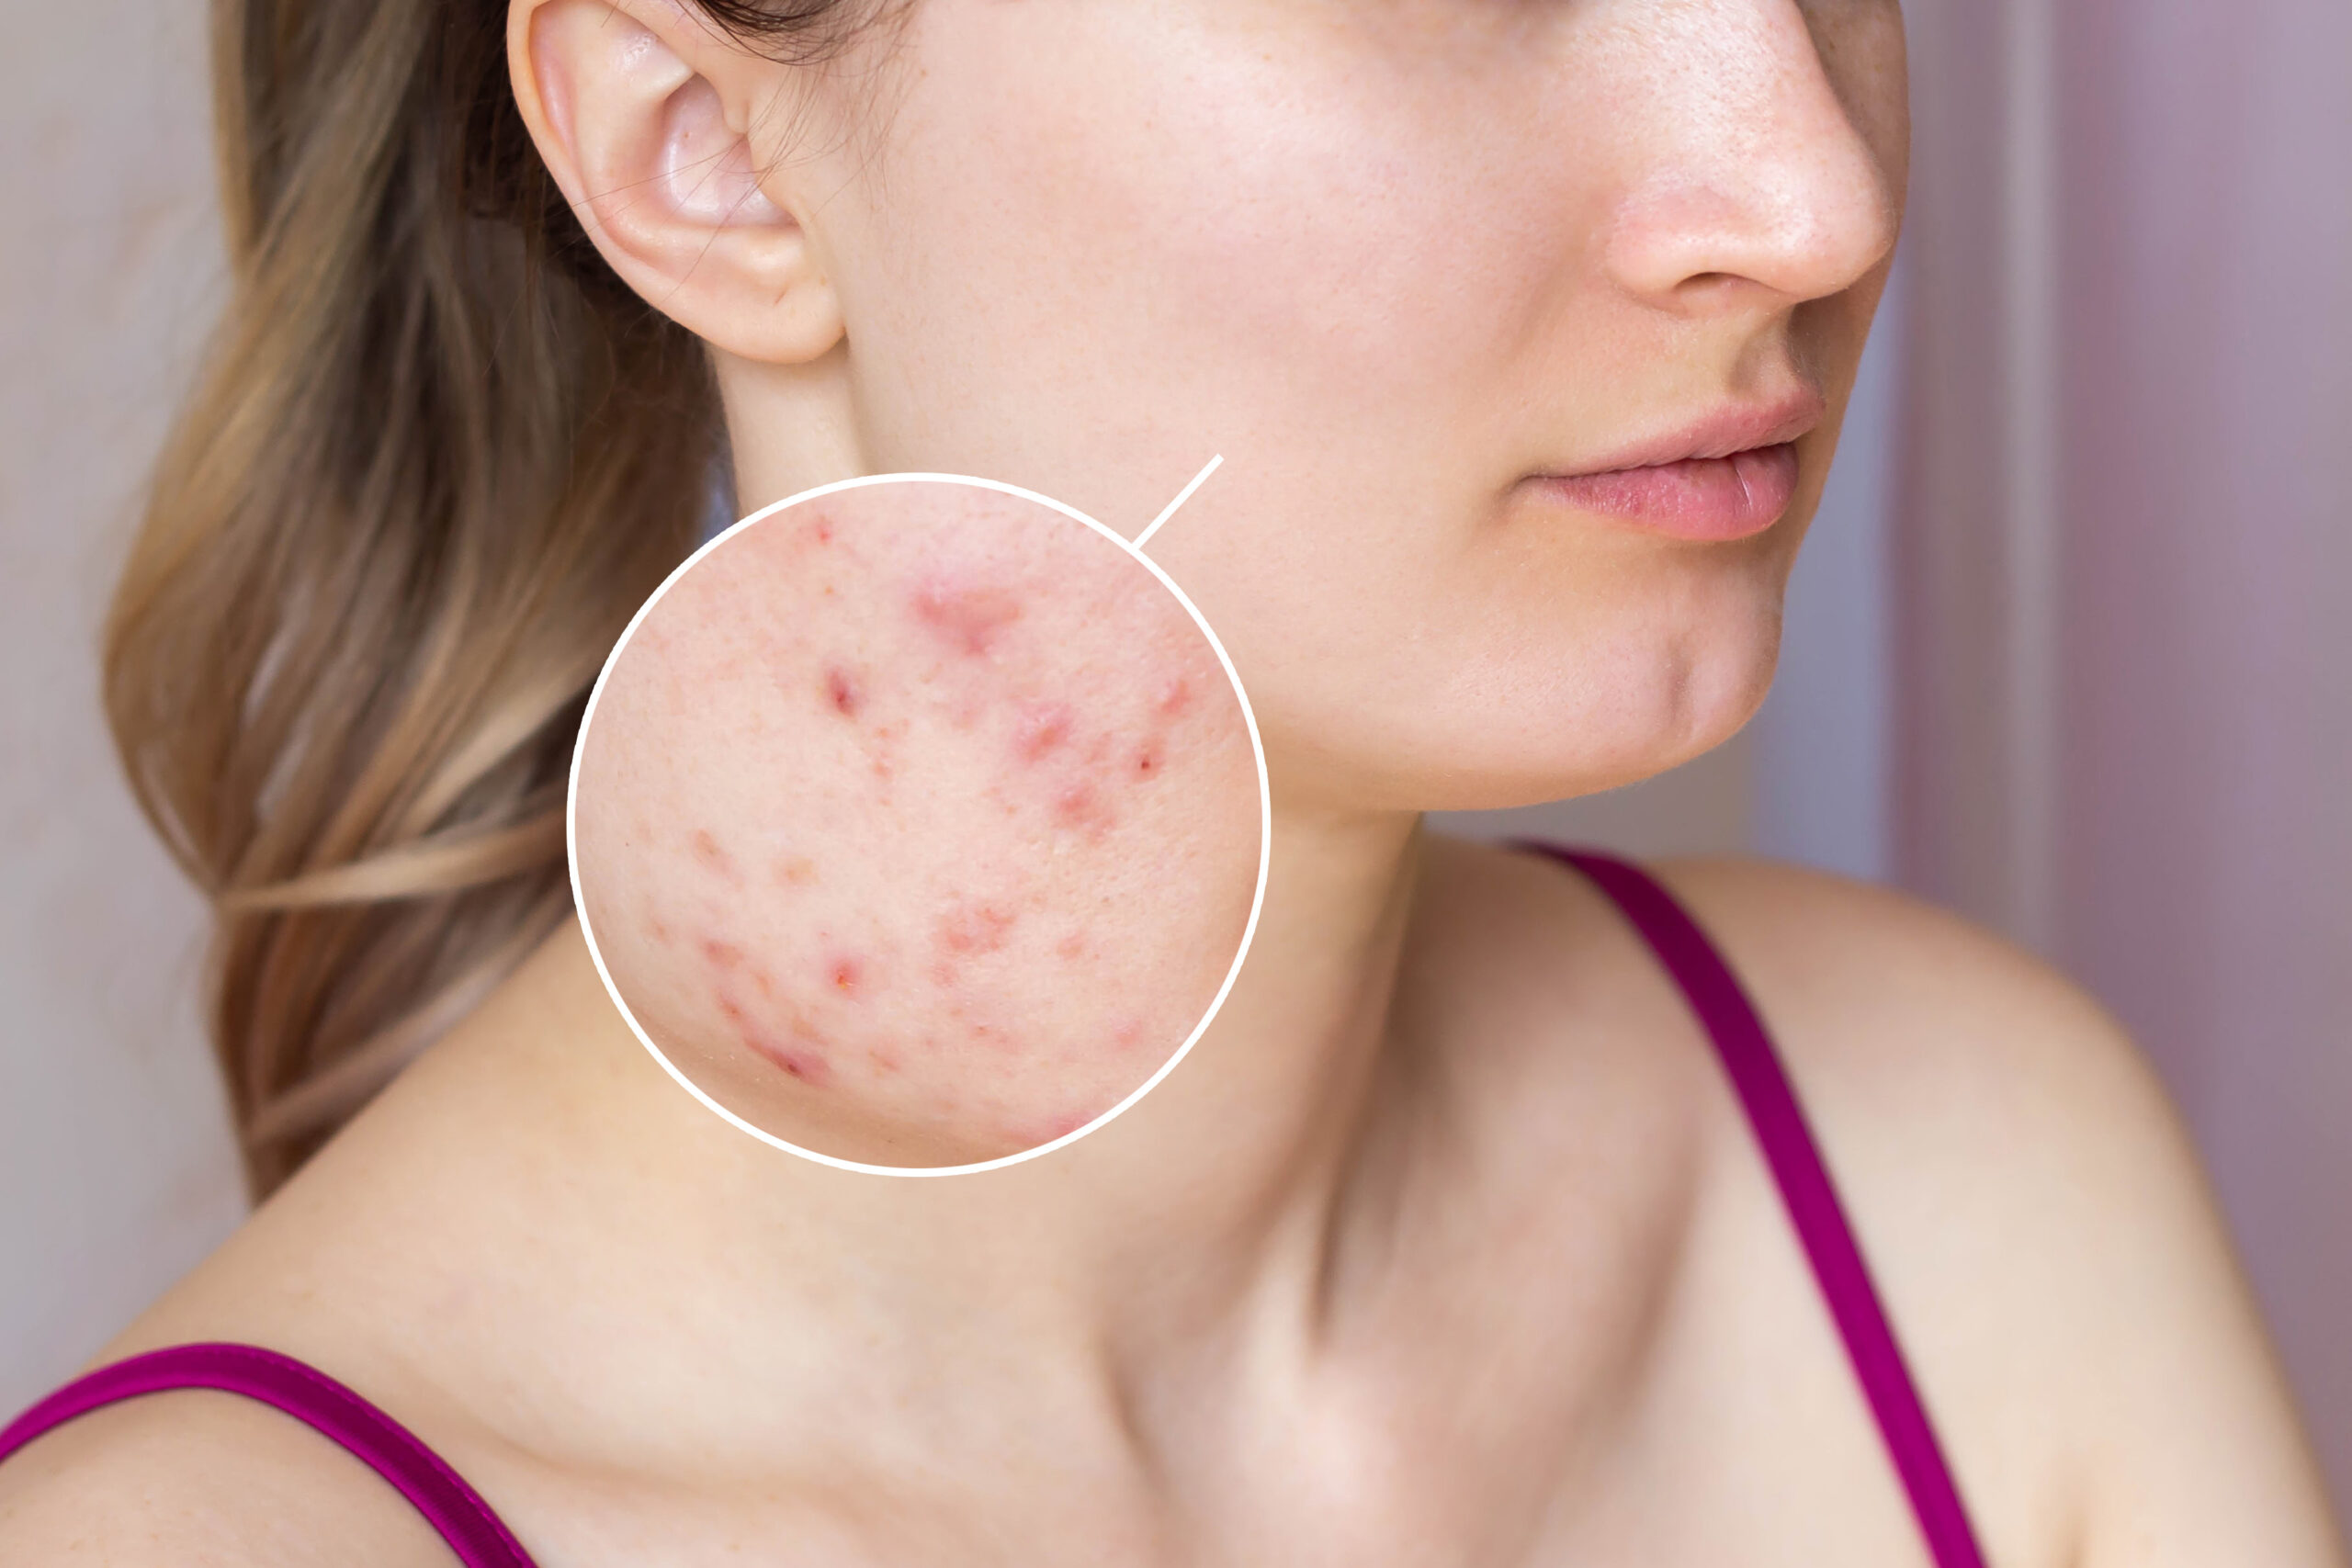 How to Get Rid of Acne Scars Fast?